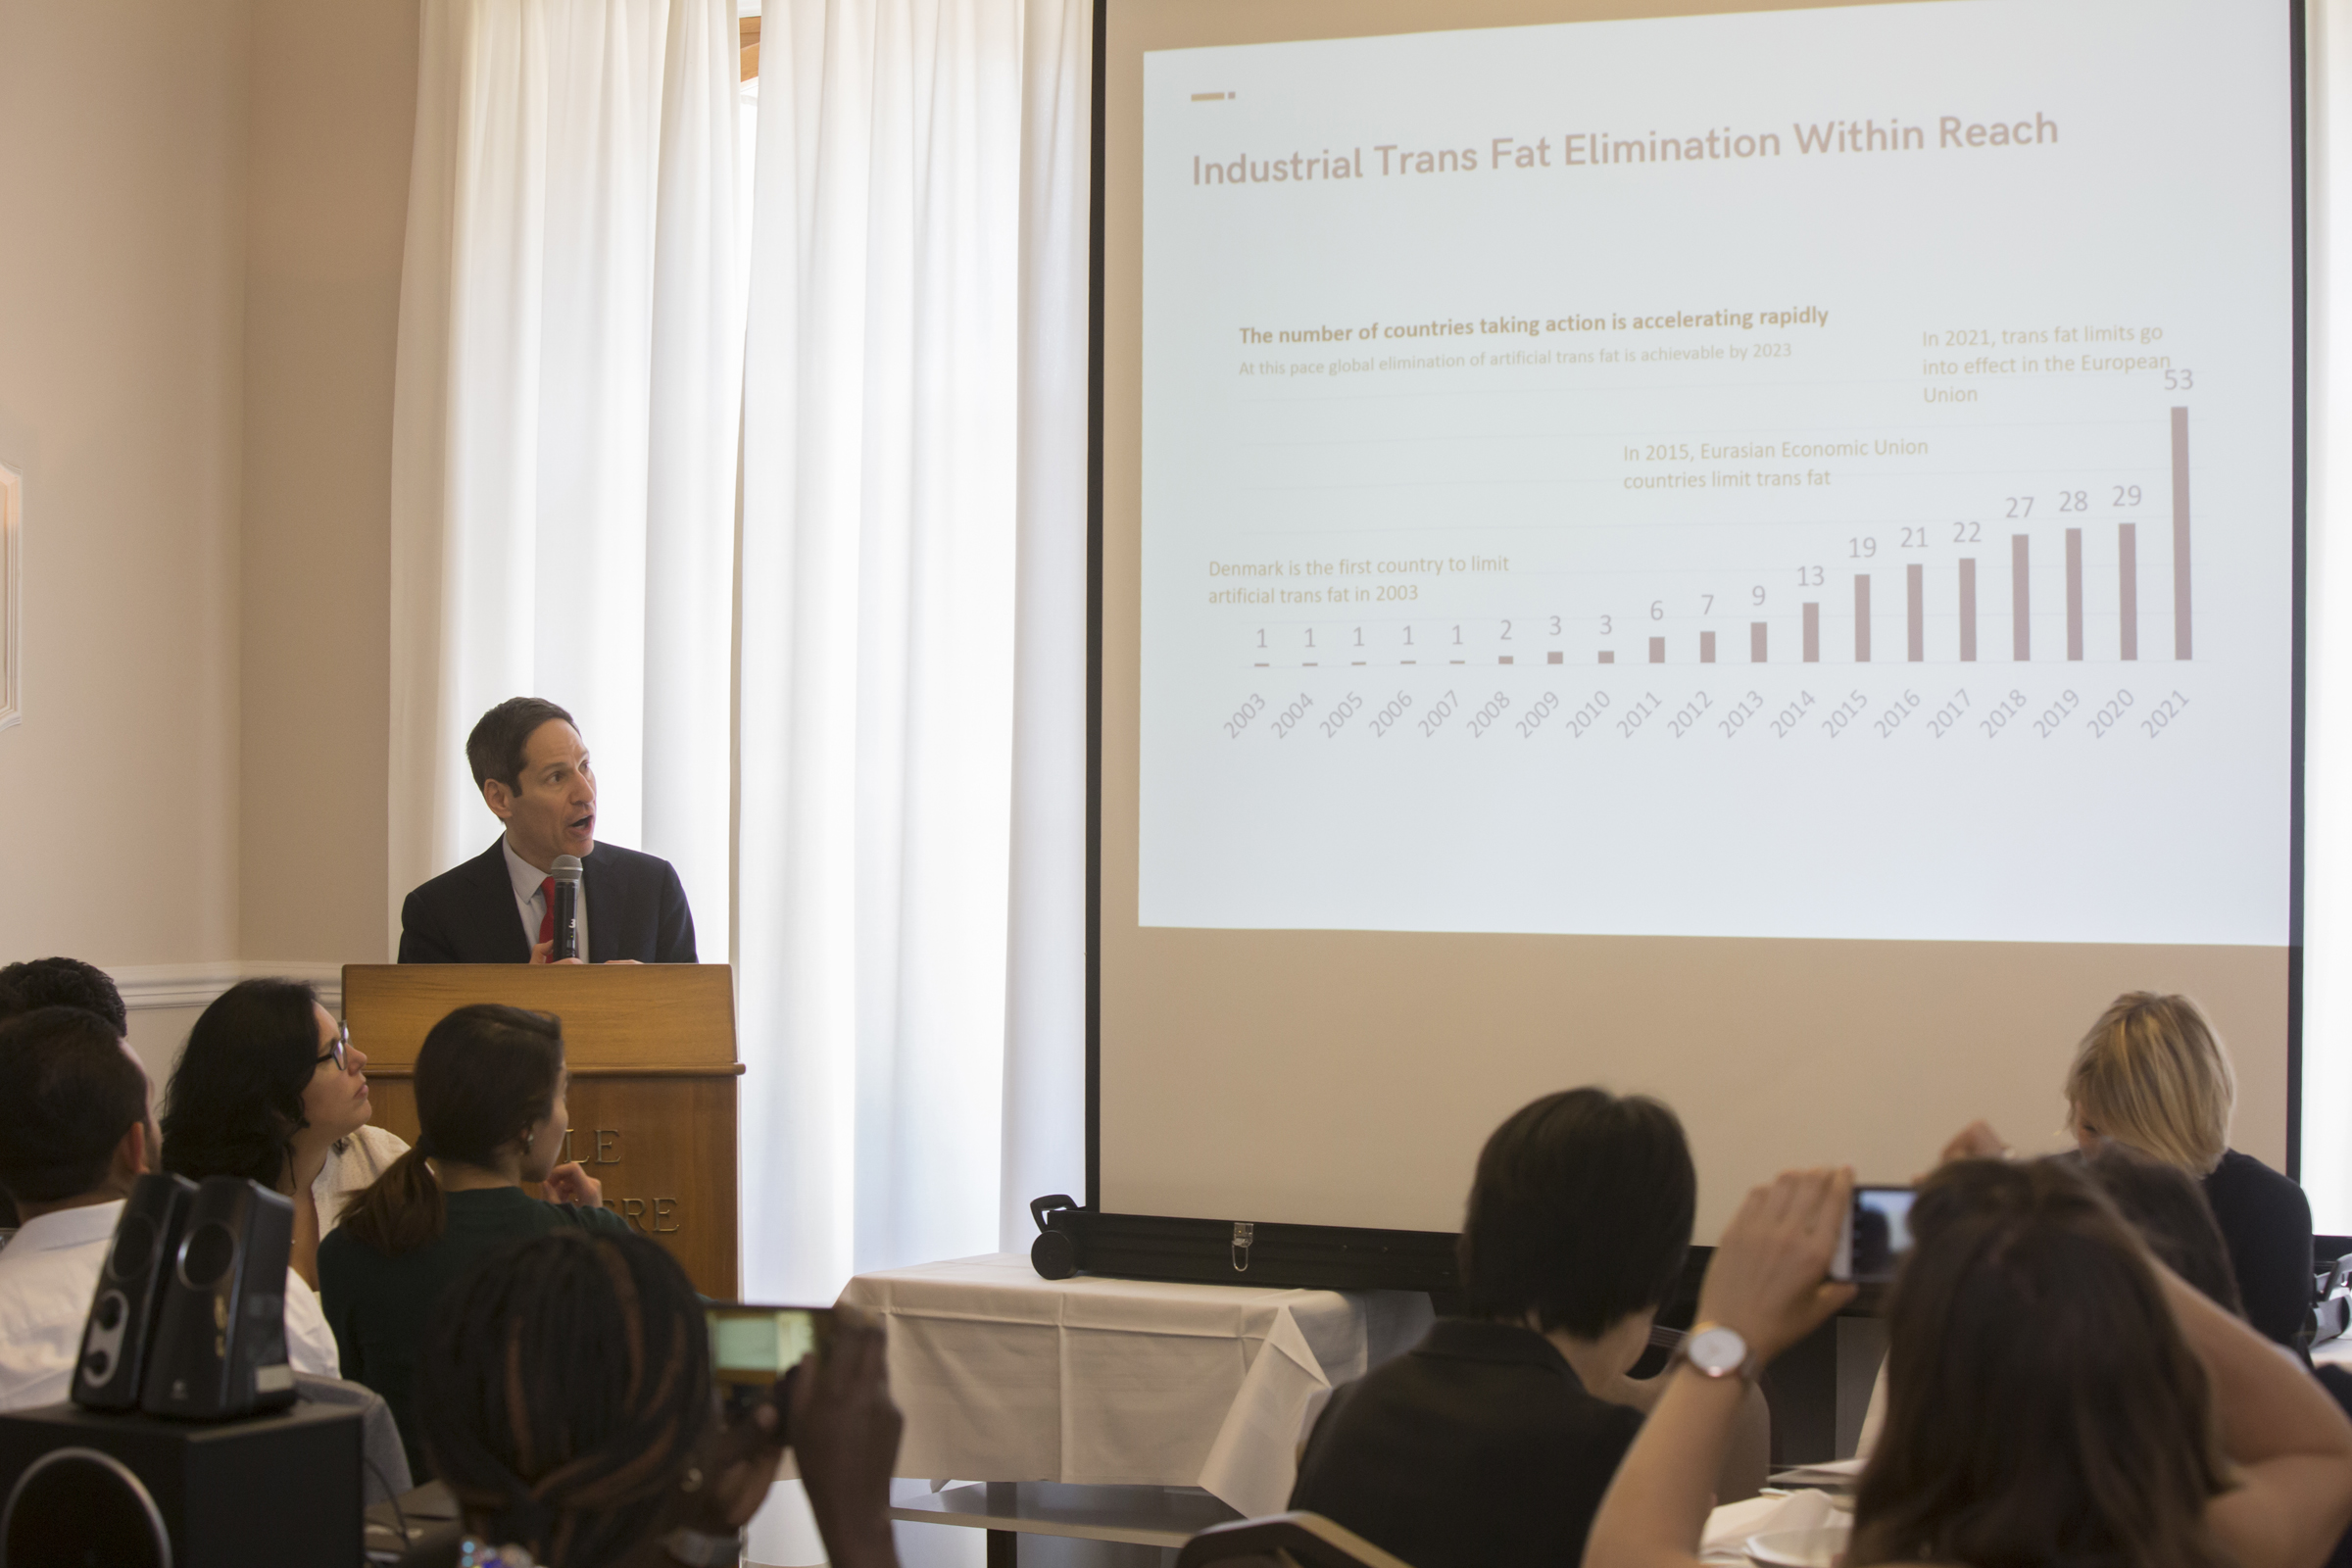 Tom Frieden, President and Chief Executive Officer of Resolve to Save Lives, speaking at the event "Nutrition Policy Action to Save Lives - Trans fat free by 2023"